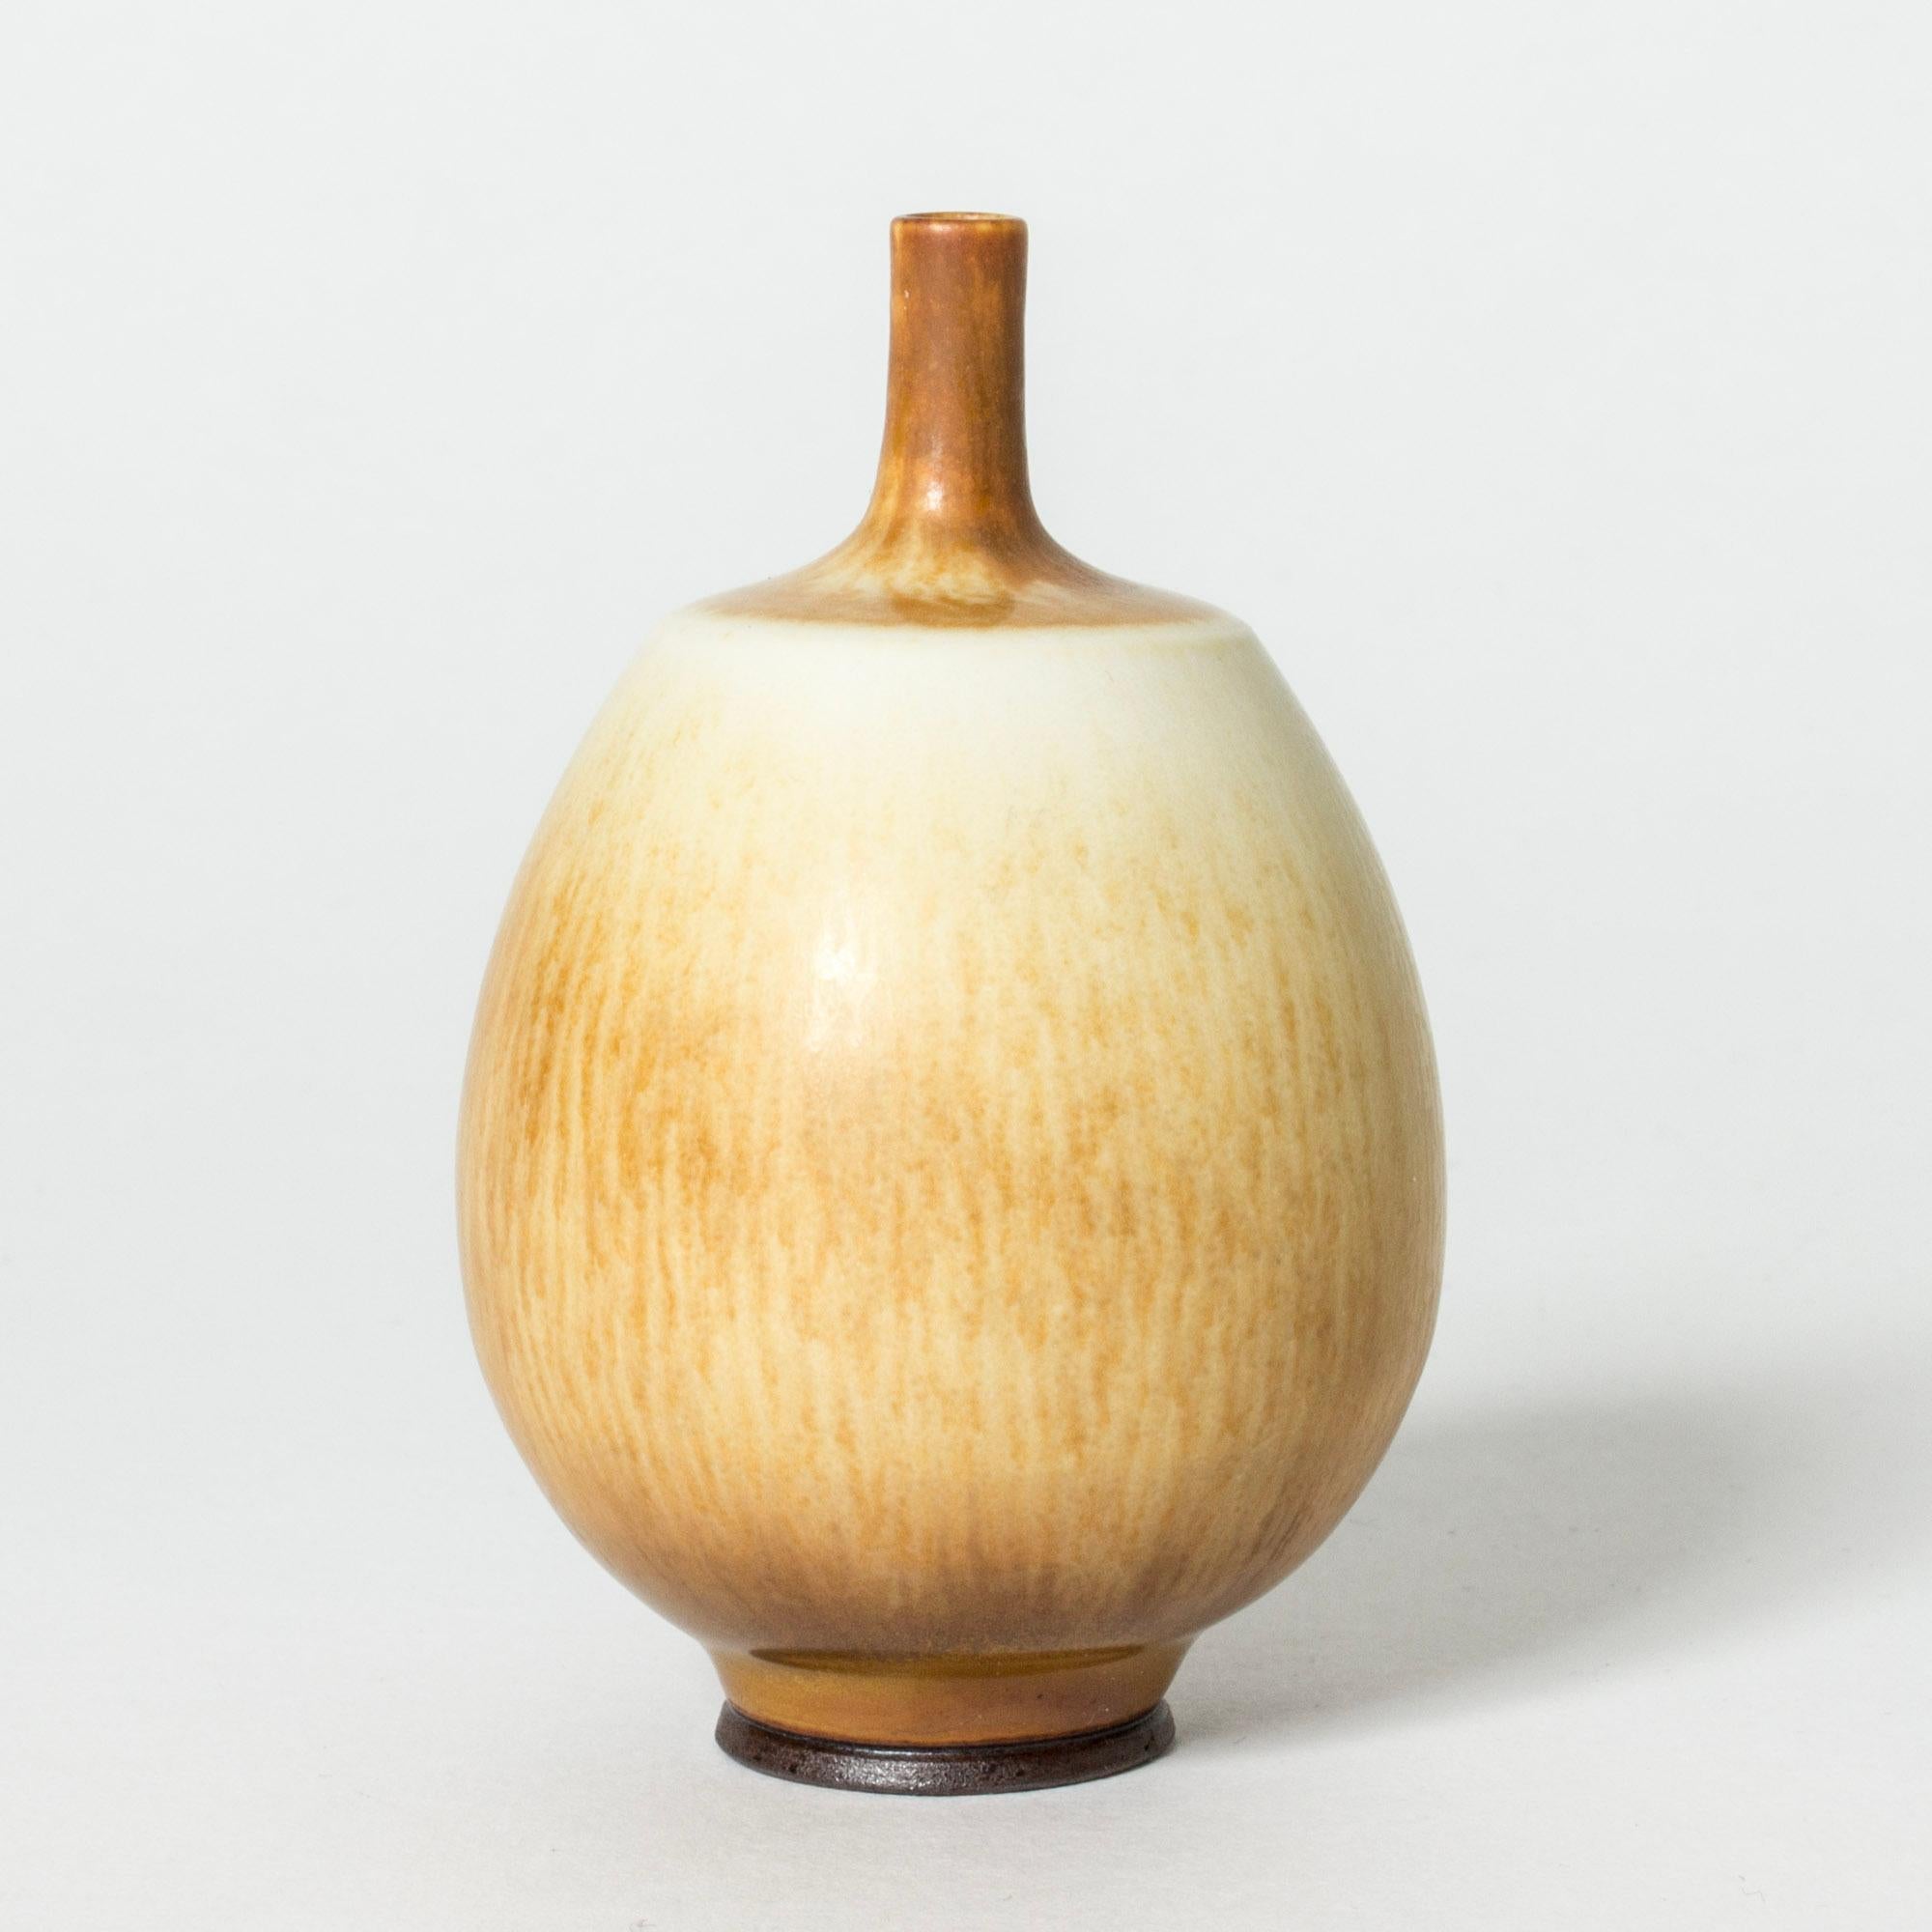 Lovely miniature stoneware vase by Berndt Friberg, in a plump form with a tiny neck. Cream and ochre hare’s fur glaze in a varying pattern over the body.

Berndt Friberg was a Swedish ceramicist, renowned for his stoneware vases and vessels for